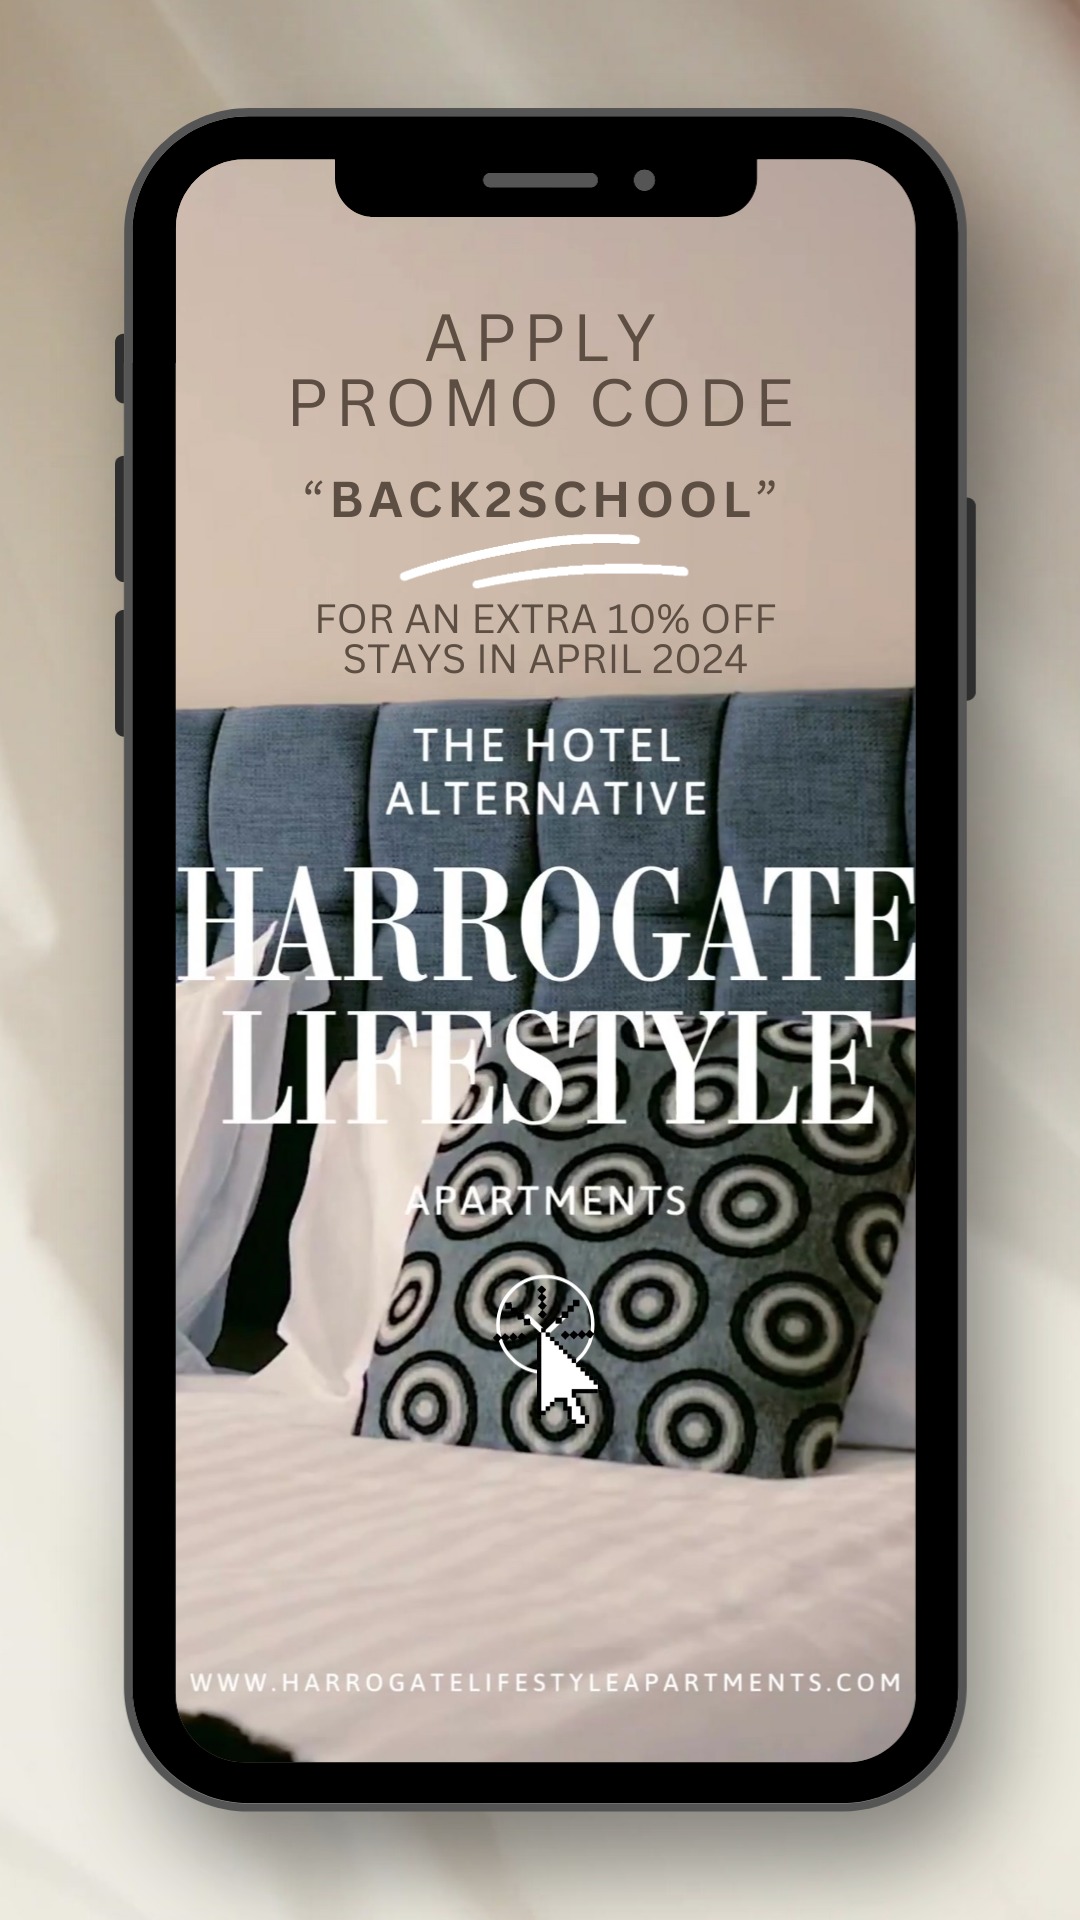 10% PROMO CODE FOR HARROGATE LIFESTYLE APARTMENTS STAYS IN APRIL 2024